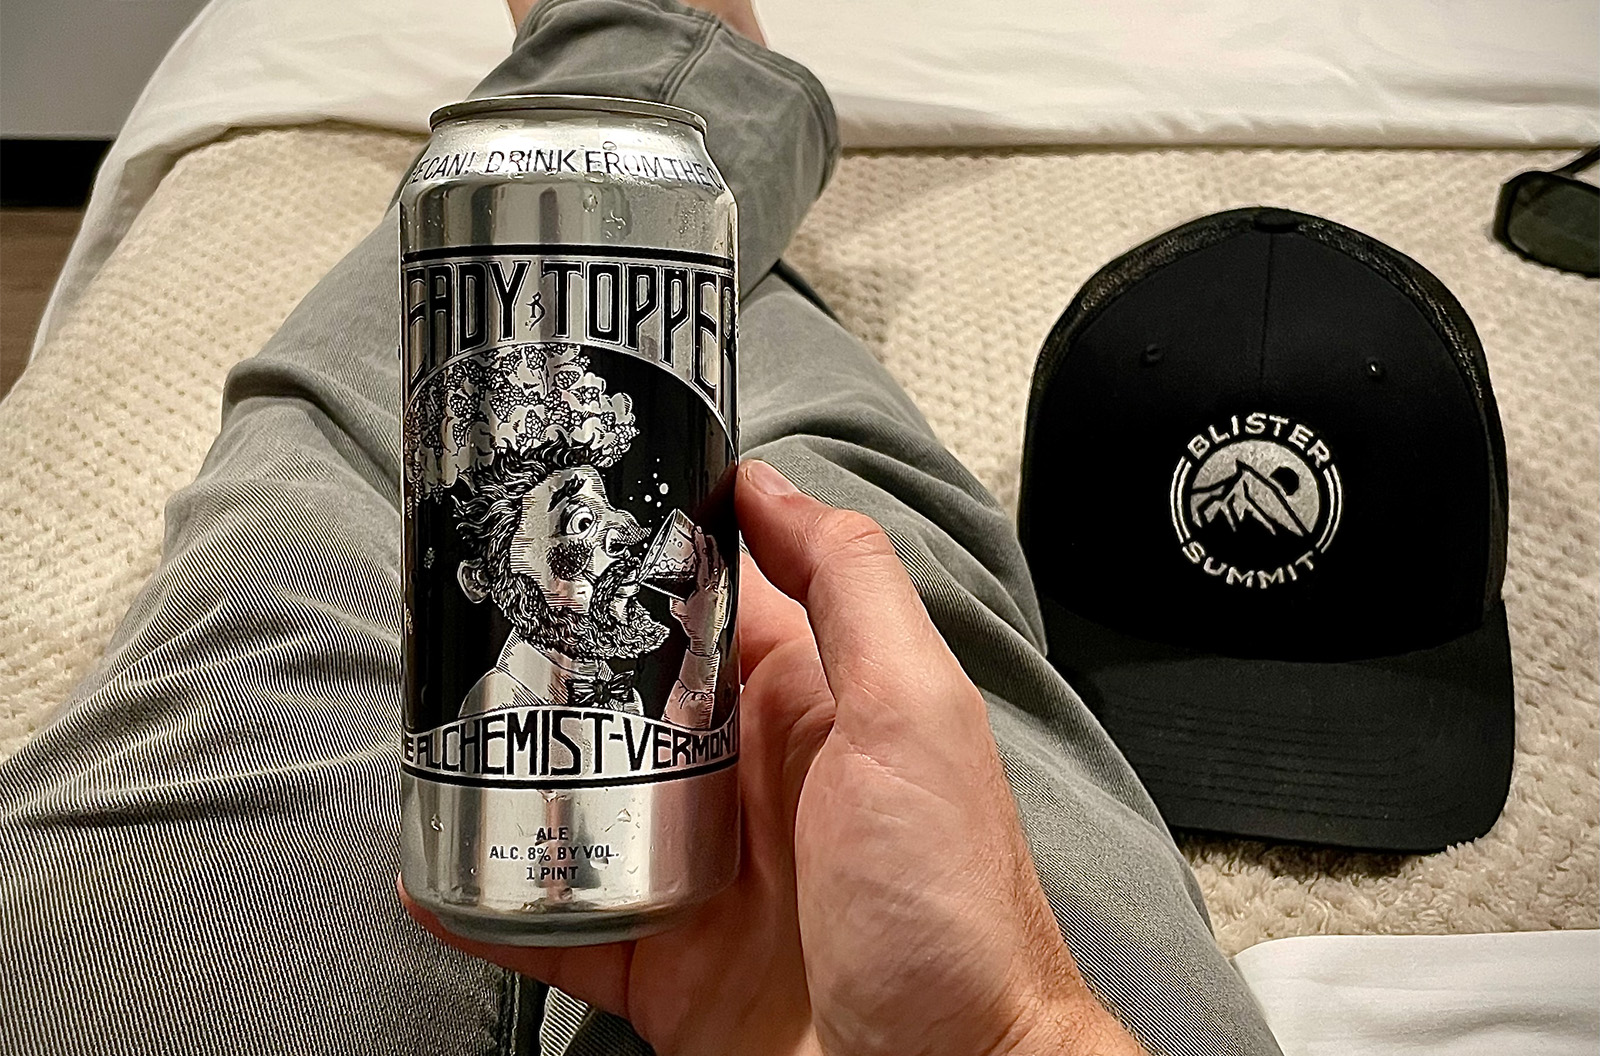 With Heady Topper, John Kimmich created one of the most sought-after beers in the world, and effectively created the profile of the modern IPA. In part 1 of this tour-de-force of a conversation on our CRAFTED podcast, we talk to John about his path to opening The Alchemist with his wife, Jen, in 2003; the business - and current landscape - of craft beer; what distinguishes great beer from mediocre beer; and more. Buckle up for this one, folks.